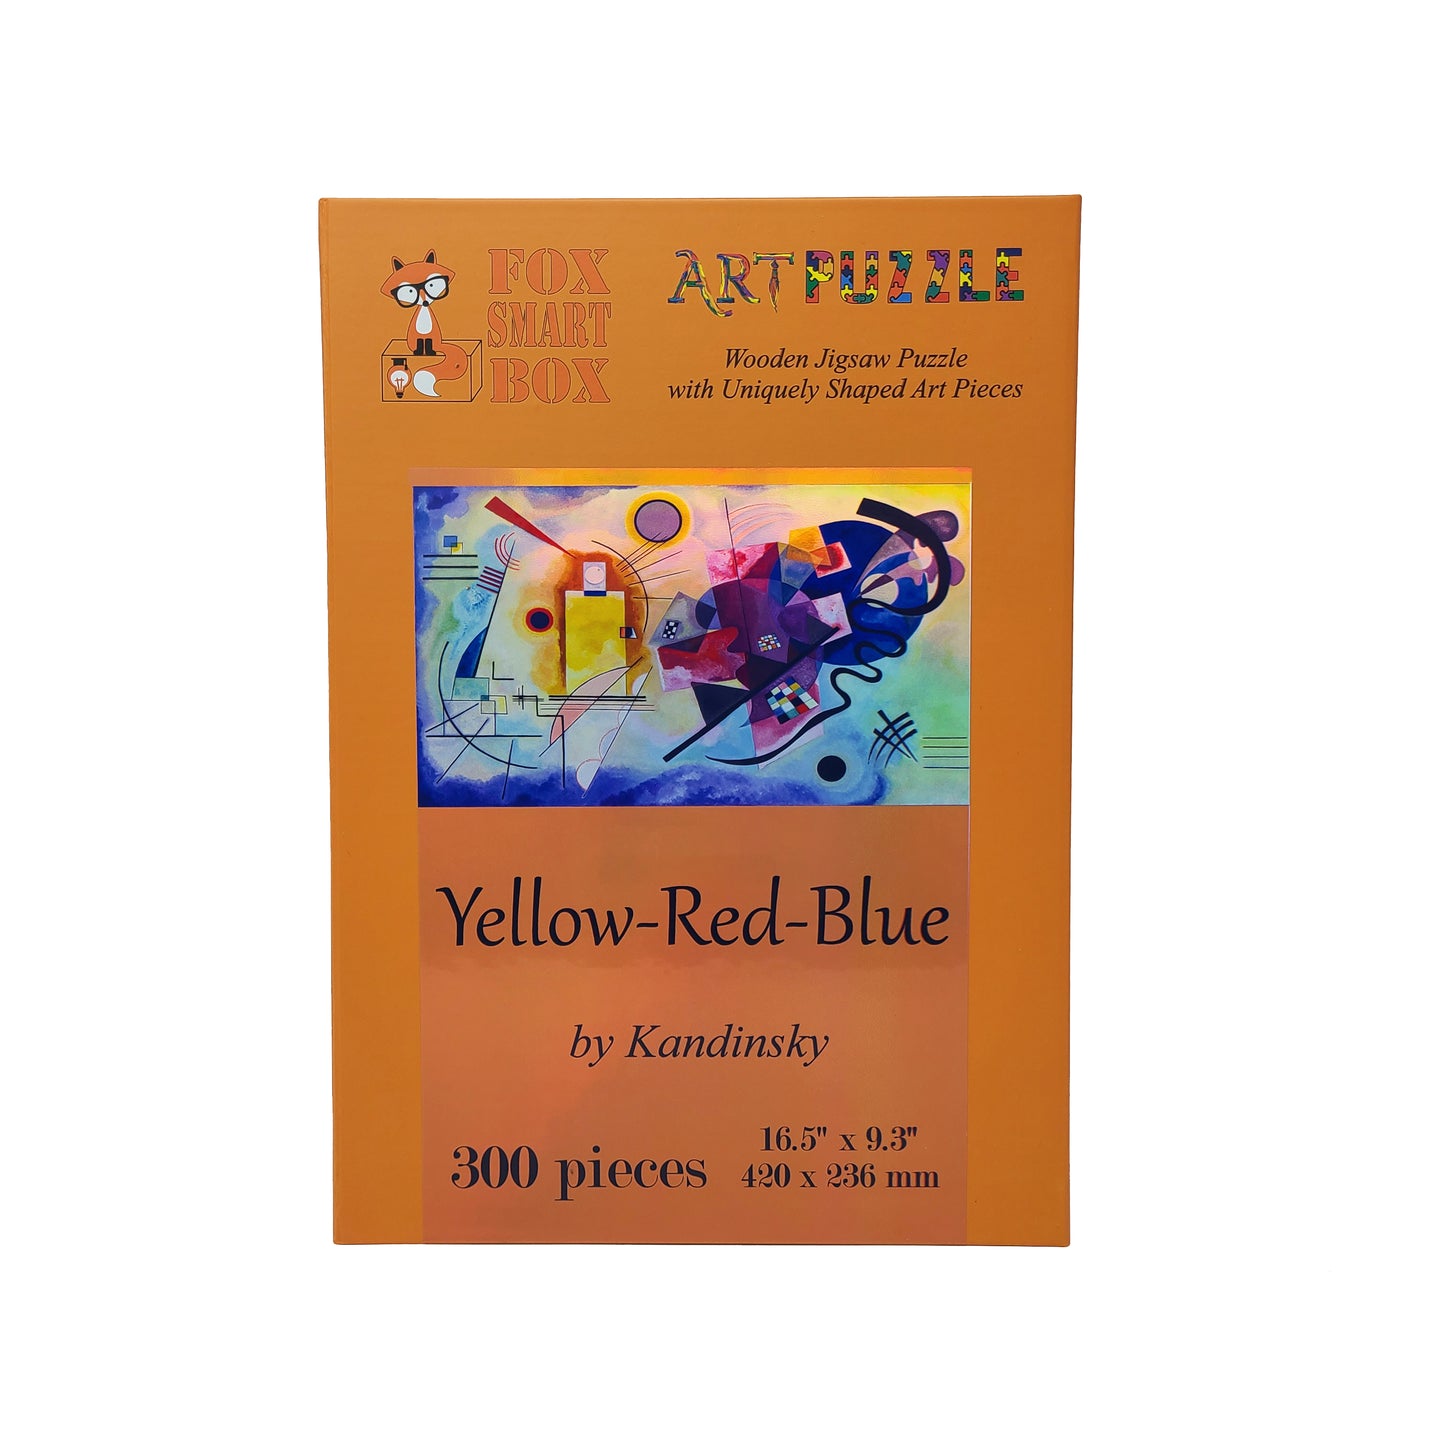 Wooden Jigsaw Puzzle with Uniquely Shaped Pieces for Adults - 300 Pieces - Challenge. Yellow-Red-Blue